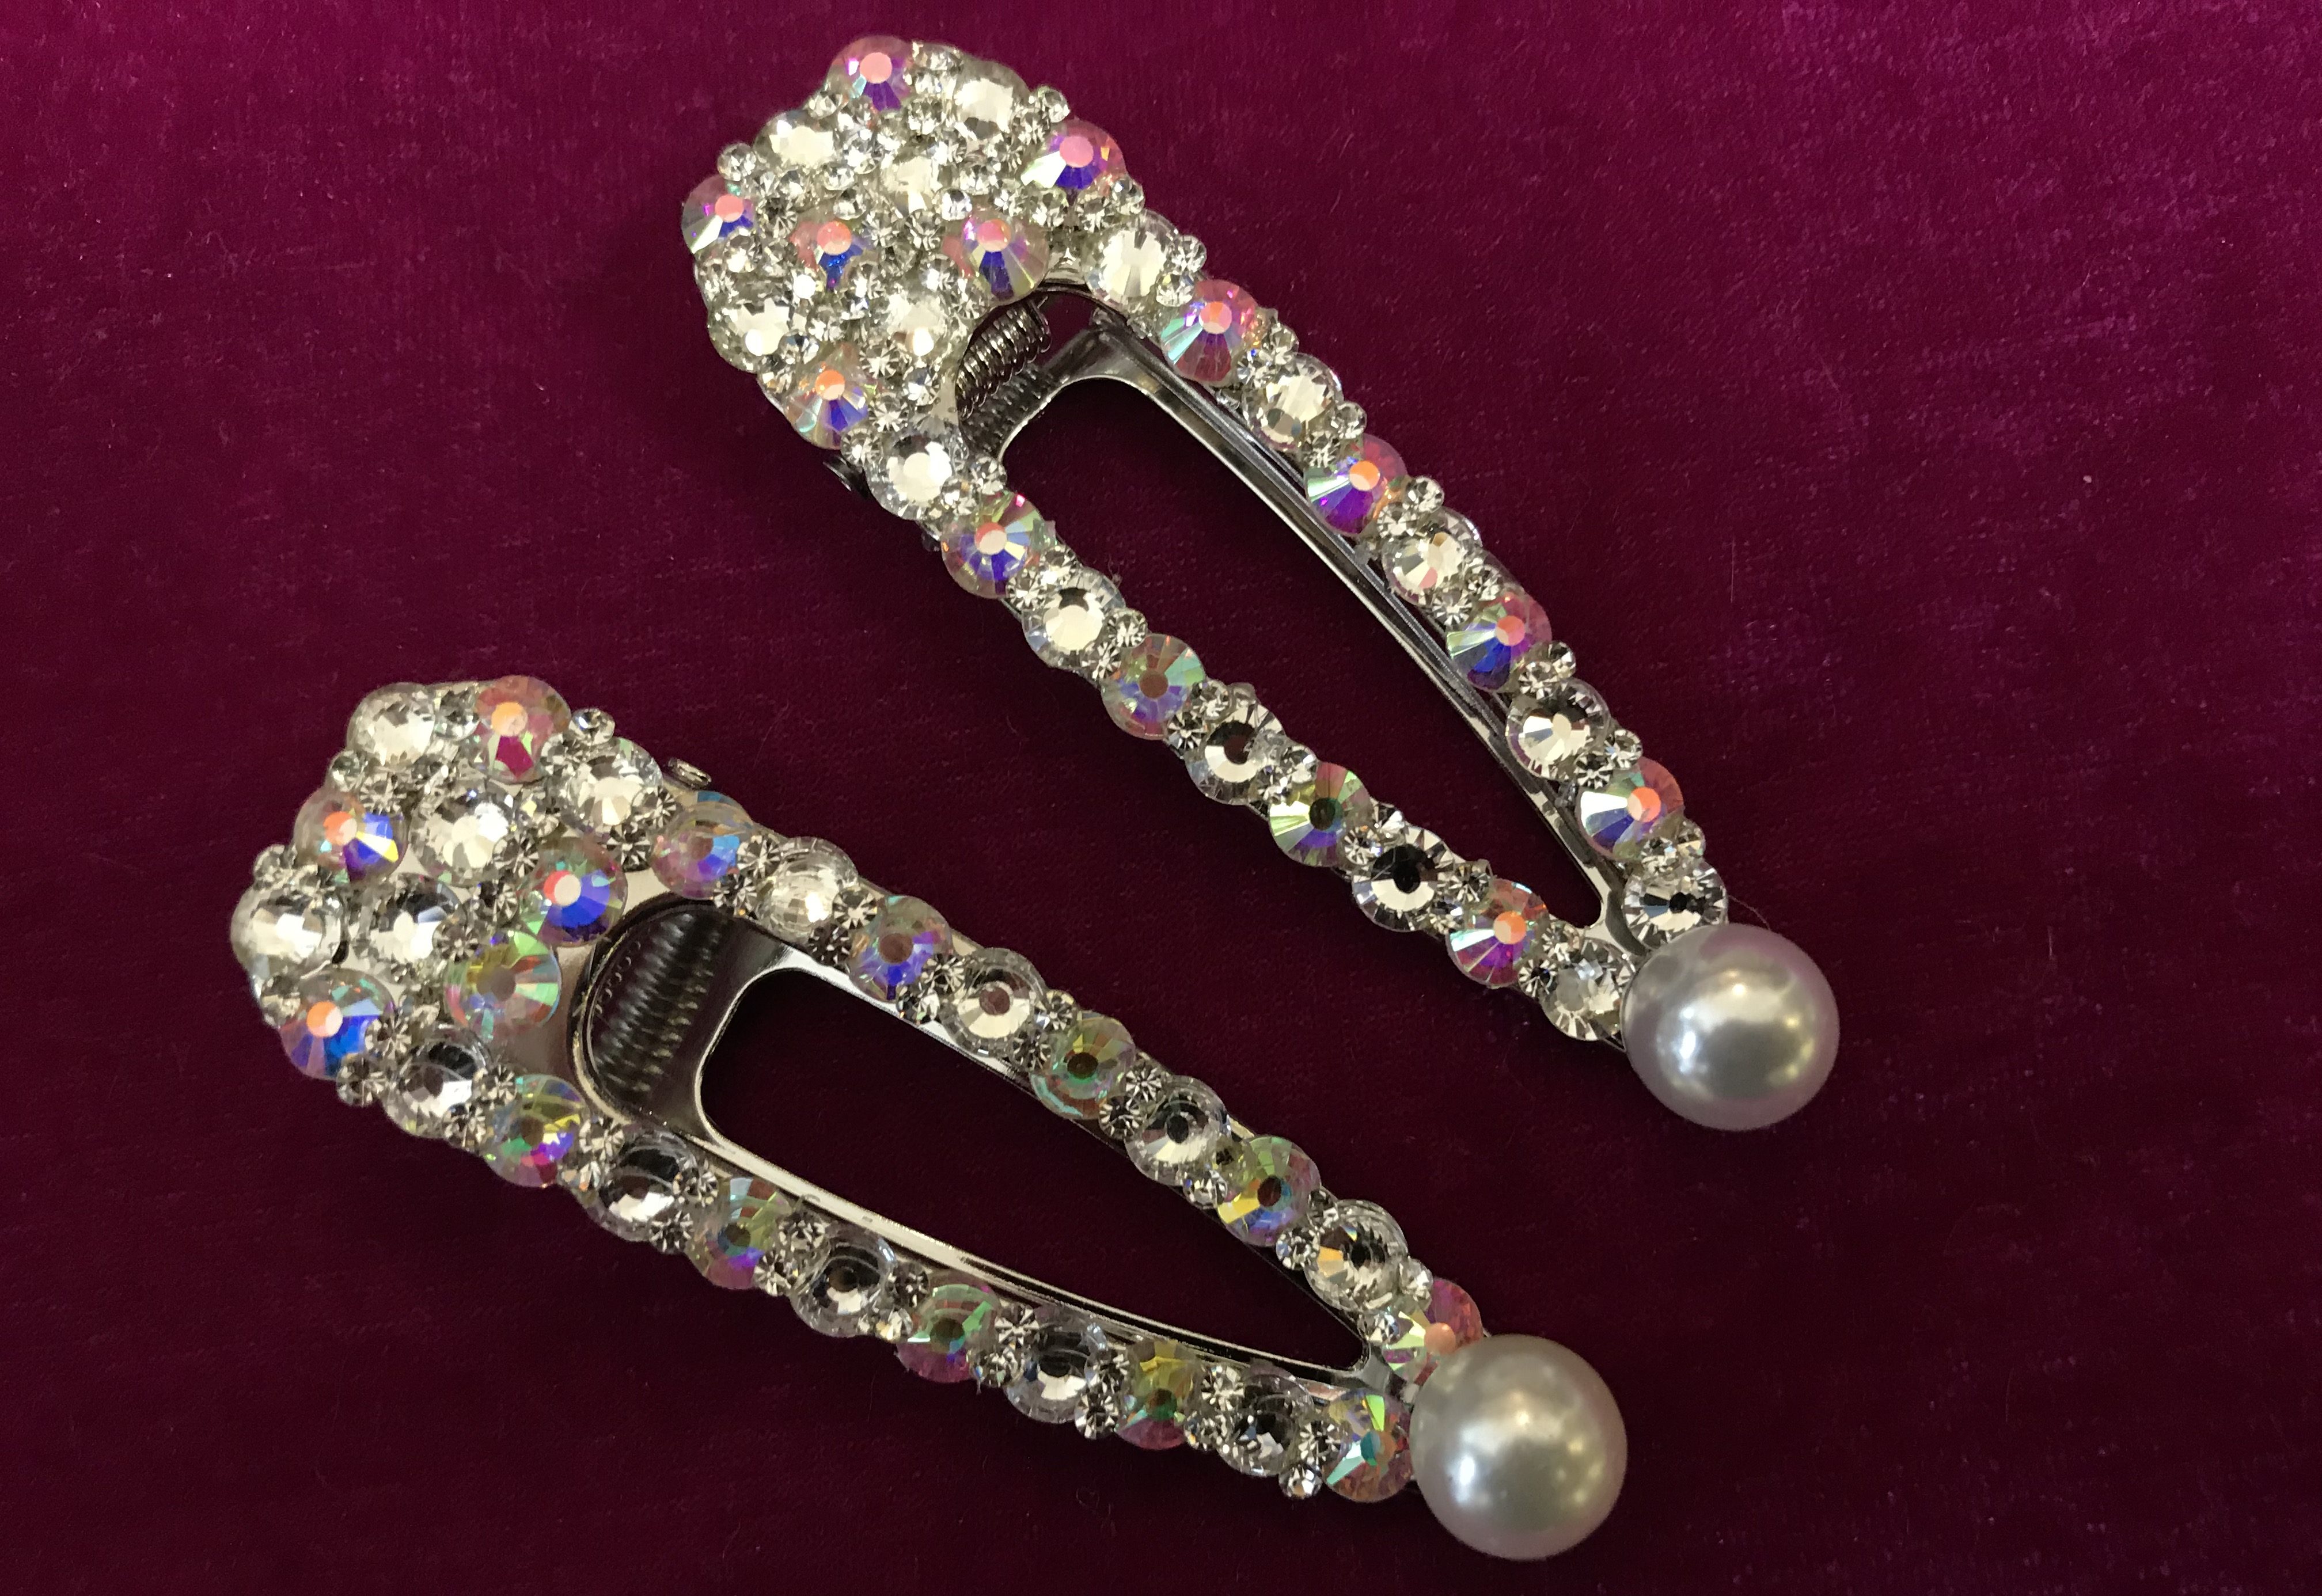 Two hair clips adorned with rhinestones and pearls